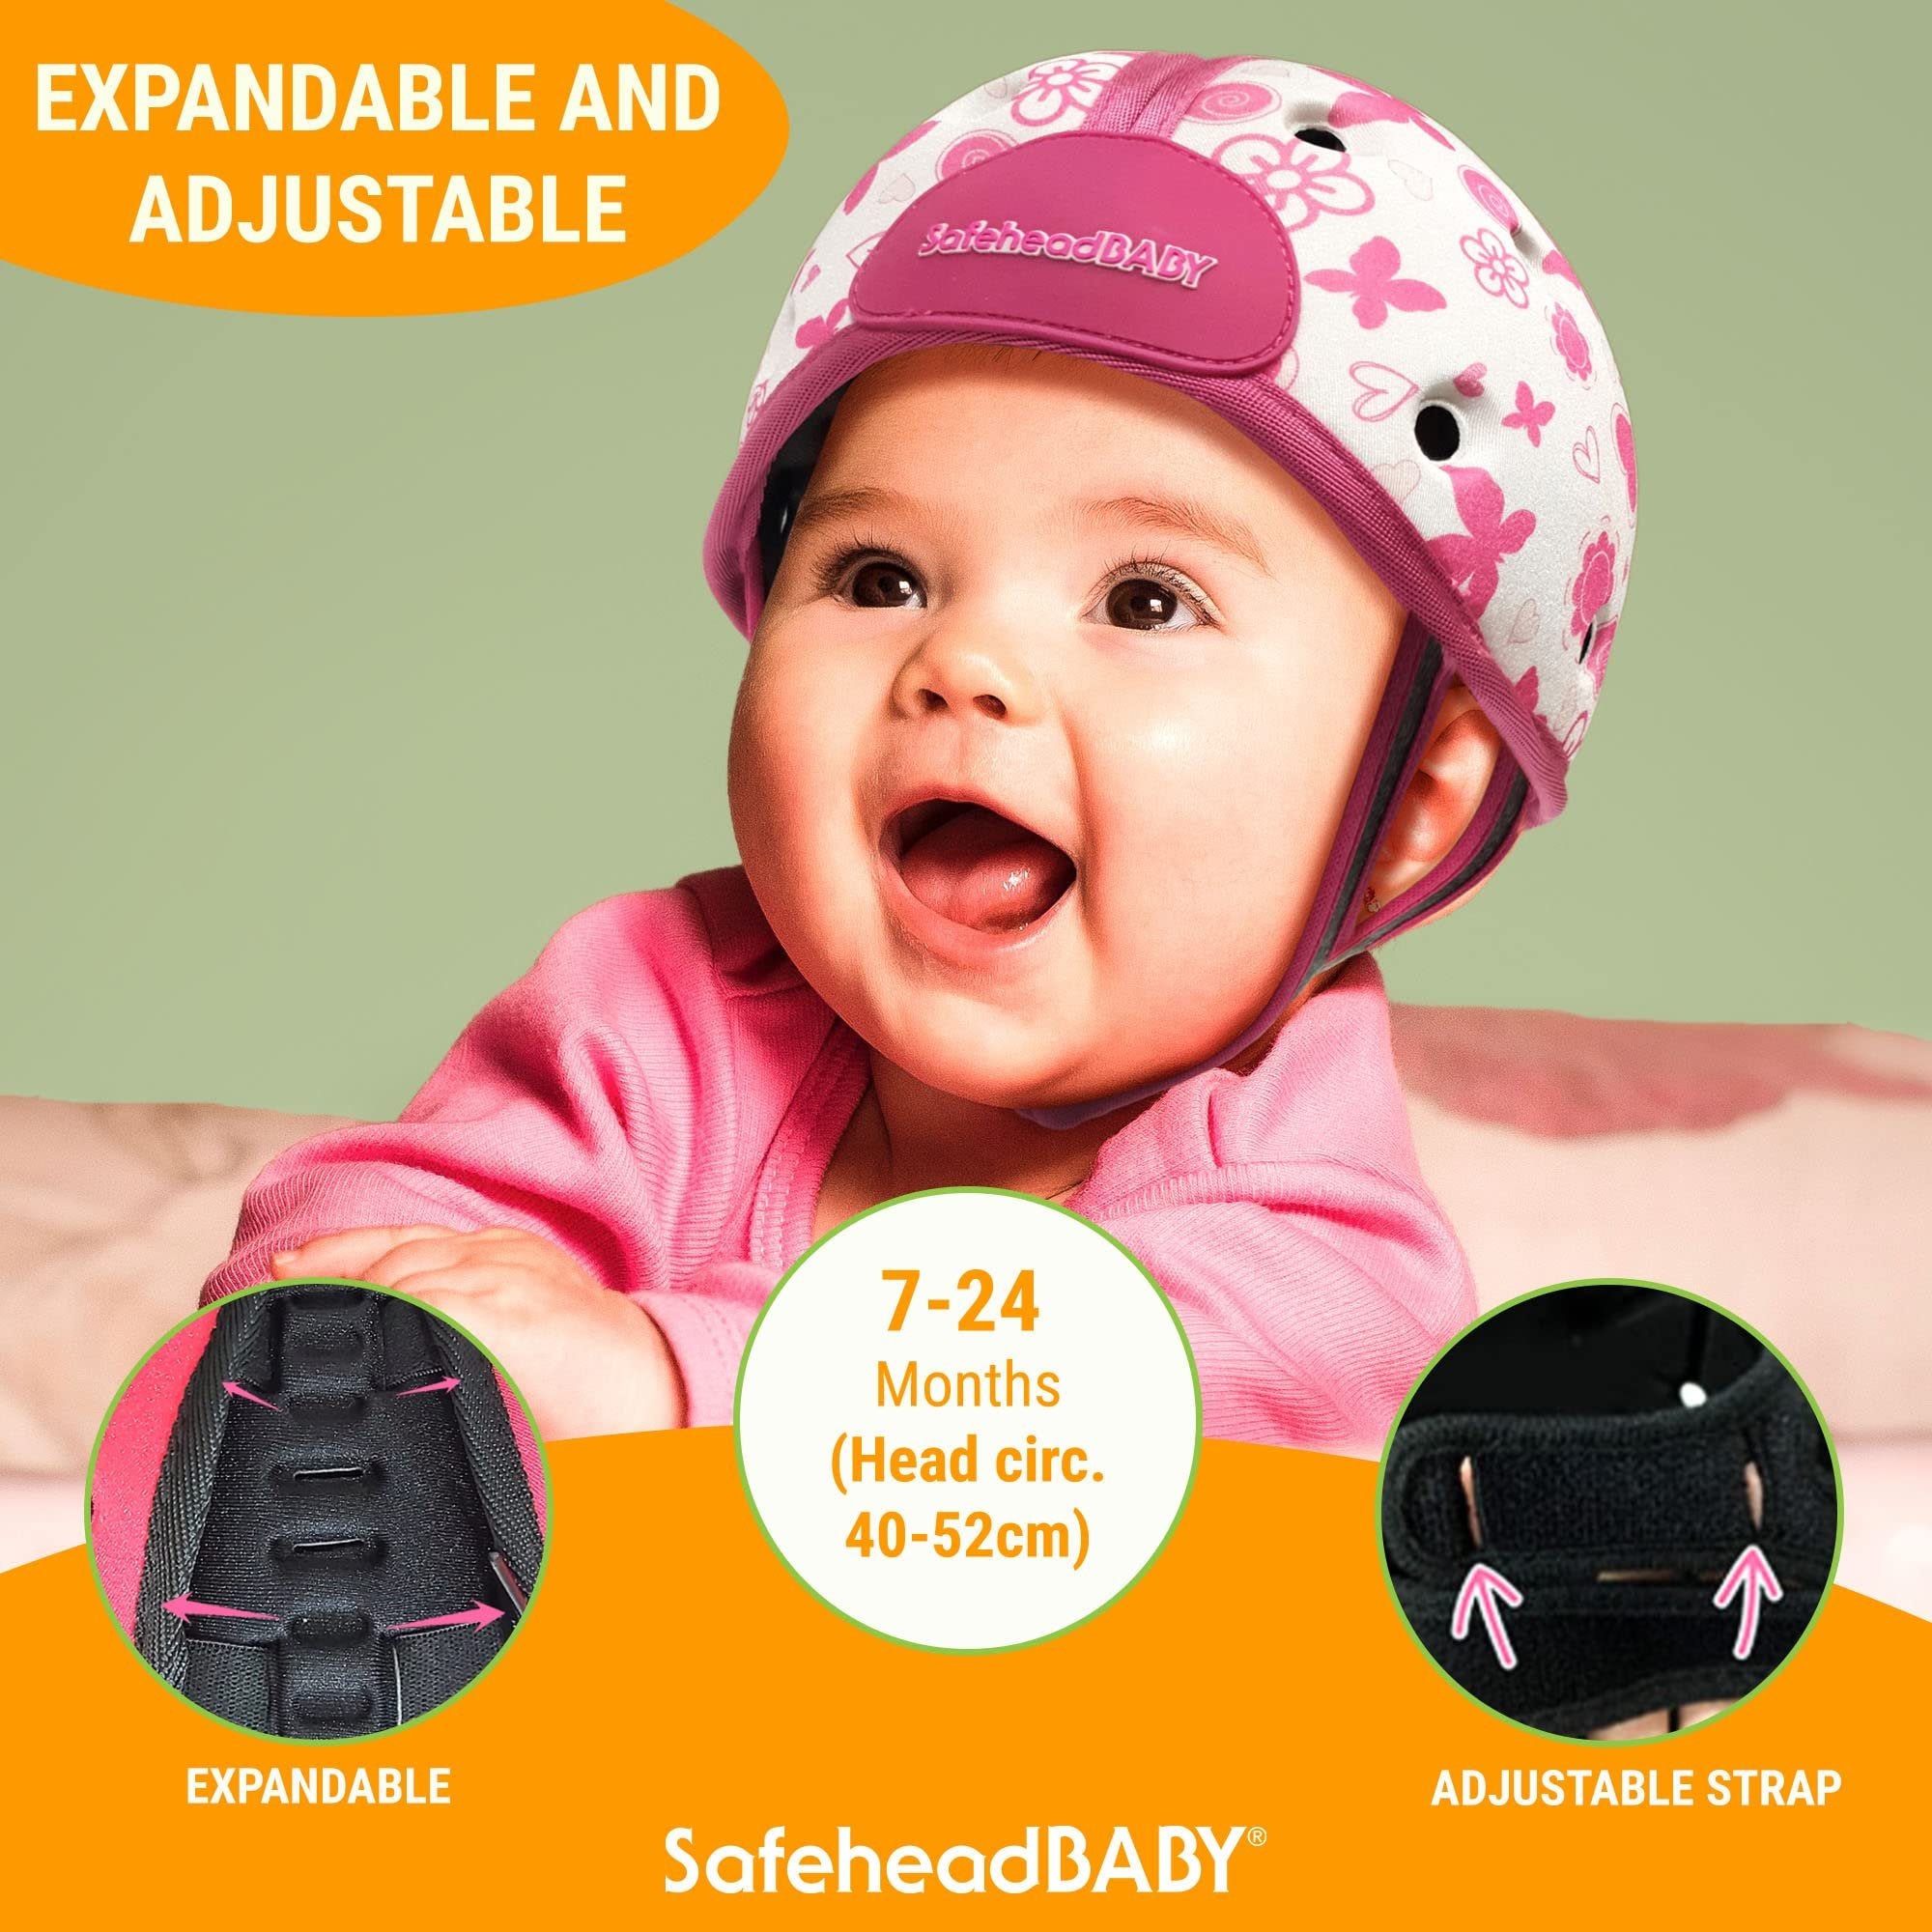 SafeheadBABY Infant Safety Helmet Giraffe Baby One Size - Tested & Certified